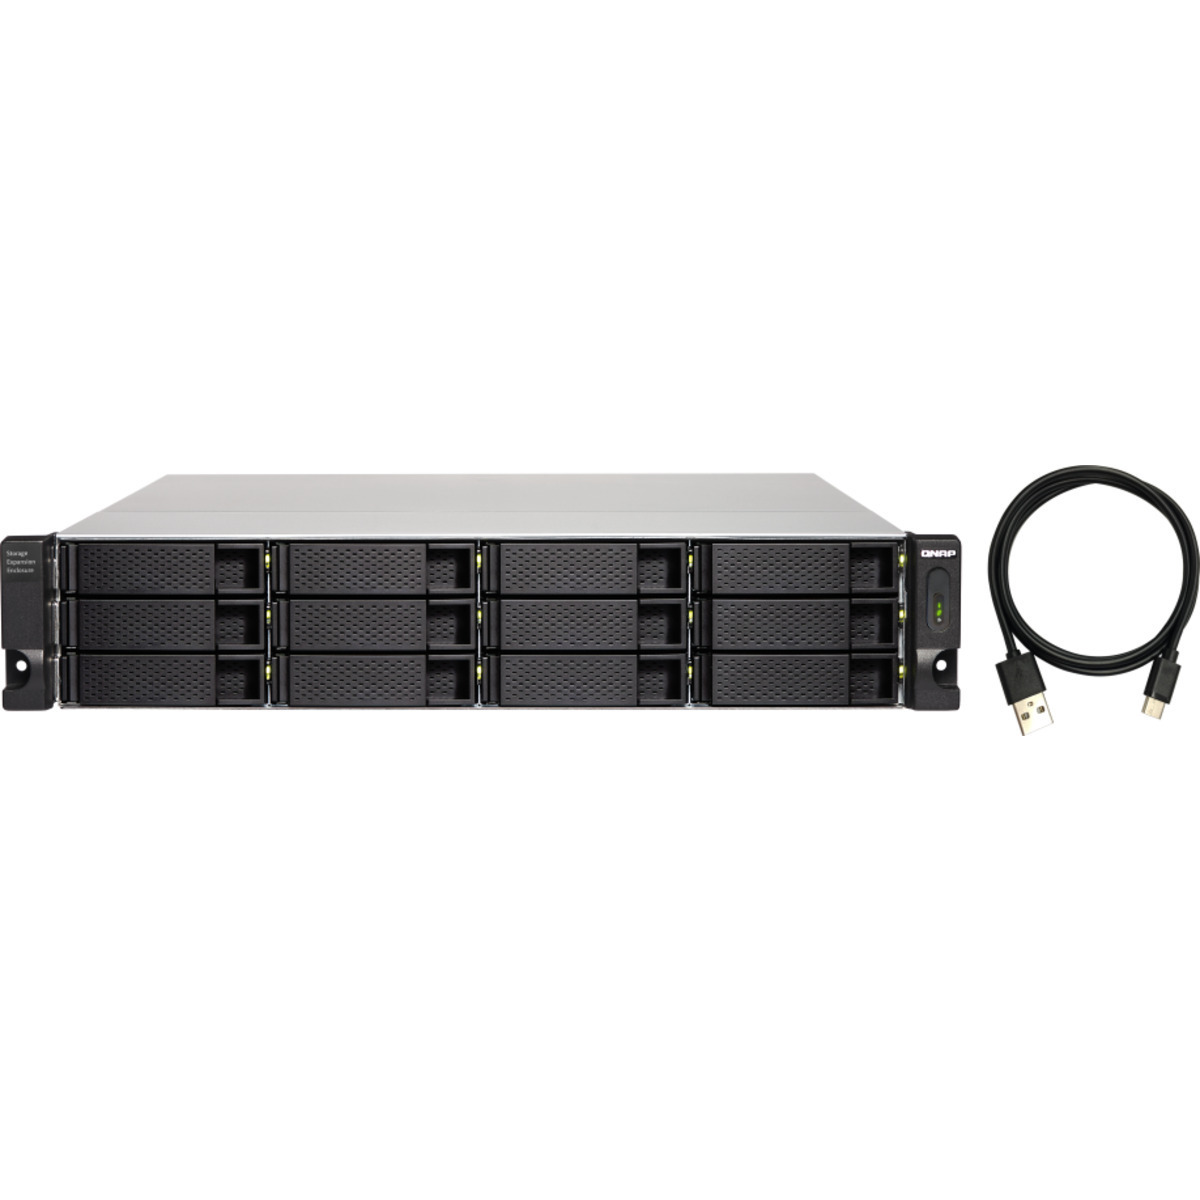 QNAP TL-R1200C-RP External Expansion Drive 44tb 12-Bay RackMount Multimedia / Power User / Business Expansion Enclosure 11x4tb Seagate IronWolf ST4000VN006 3.5 5400rpm SATA 6Gb/s HDD NAS Class Drives Installed - Burn-In Tested TL-R1200C-RP External Expansion Drive